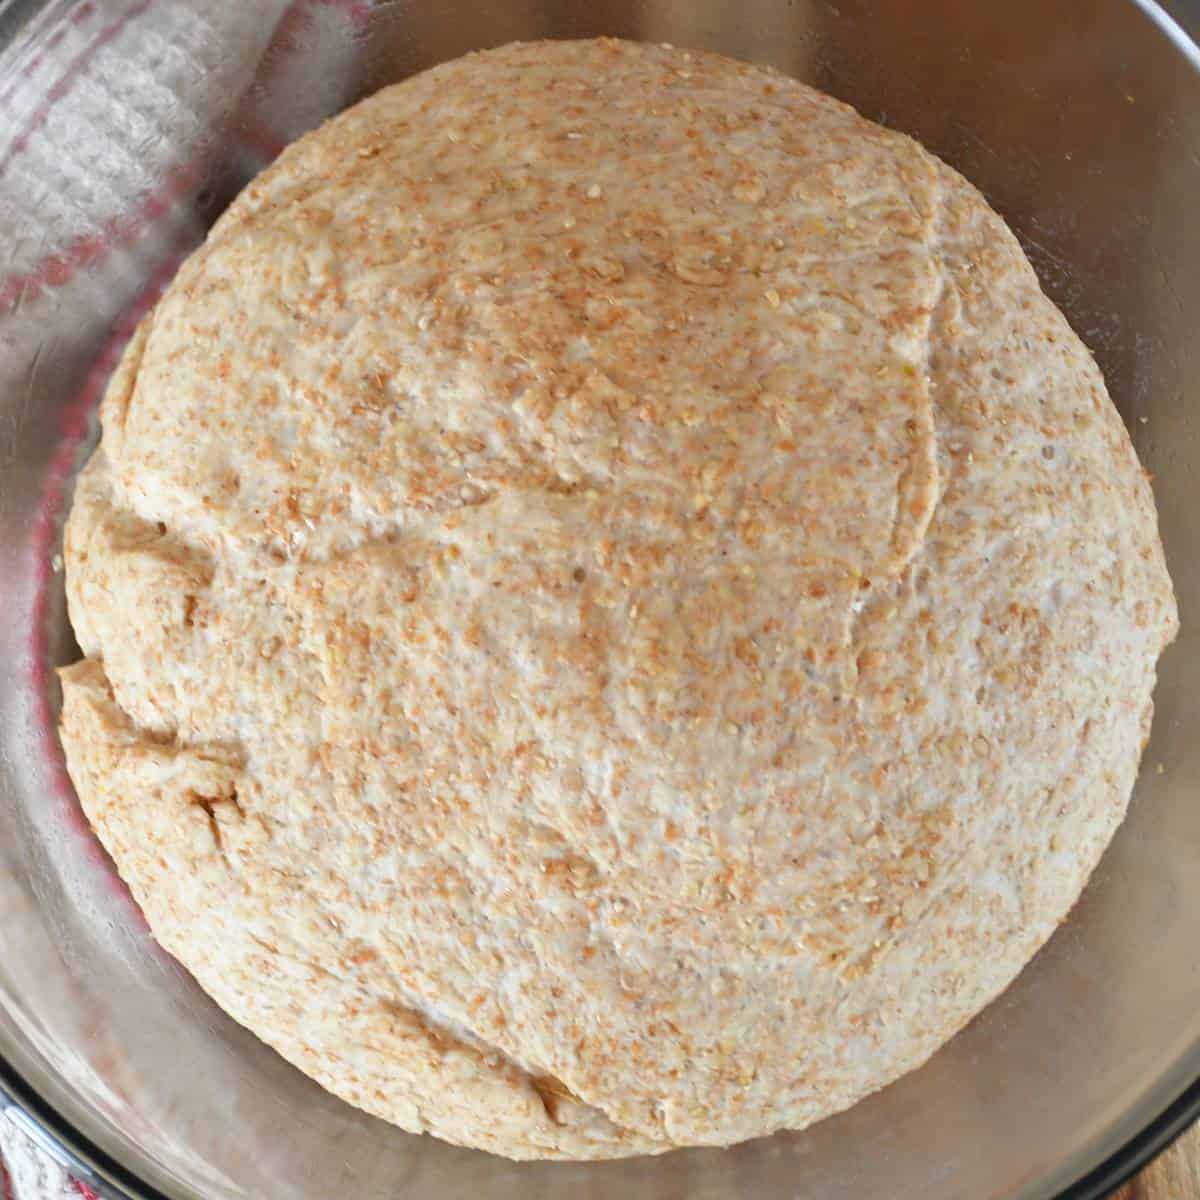 Whole wheat pizza dough without salt after a period of rising in an oiled bowl.